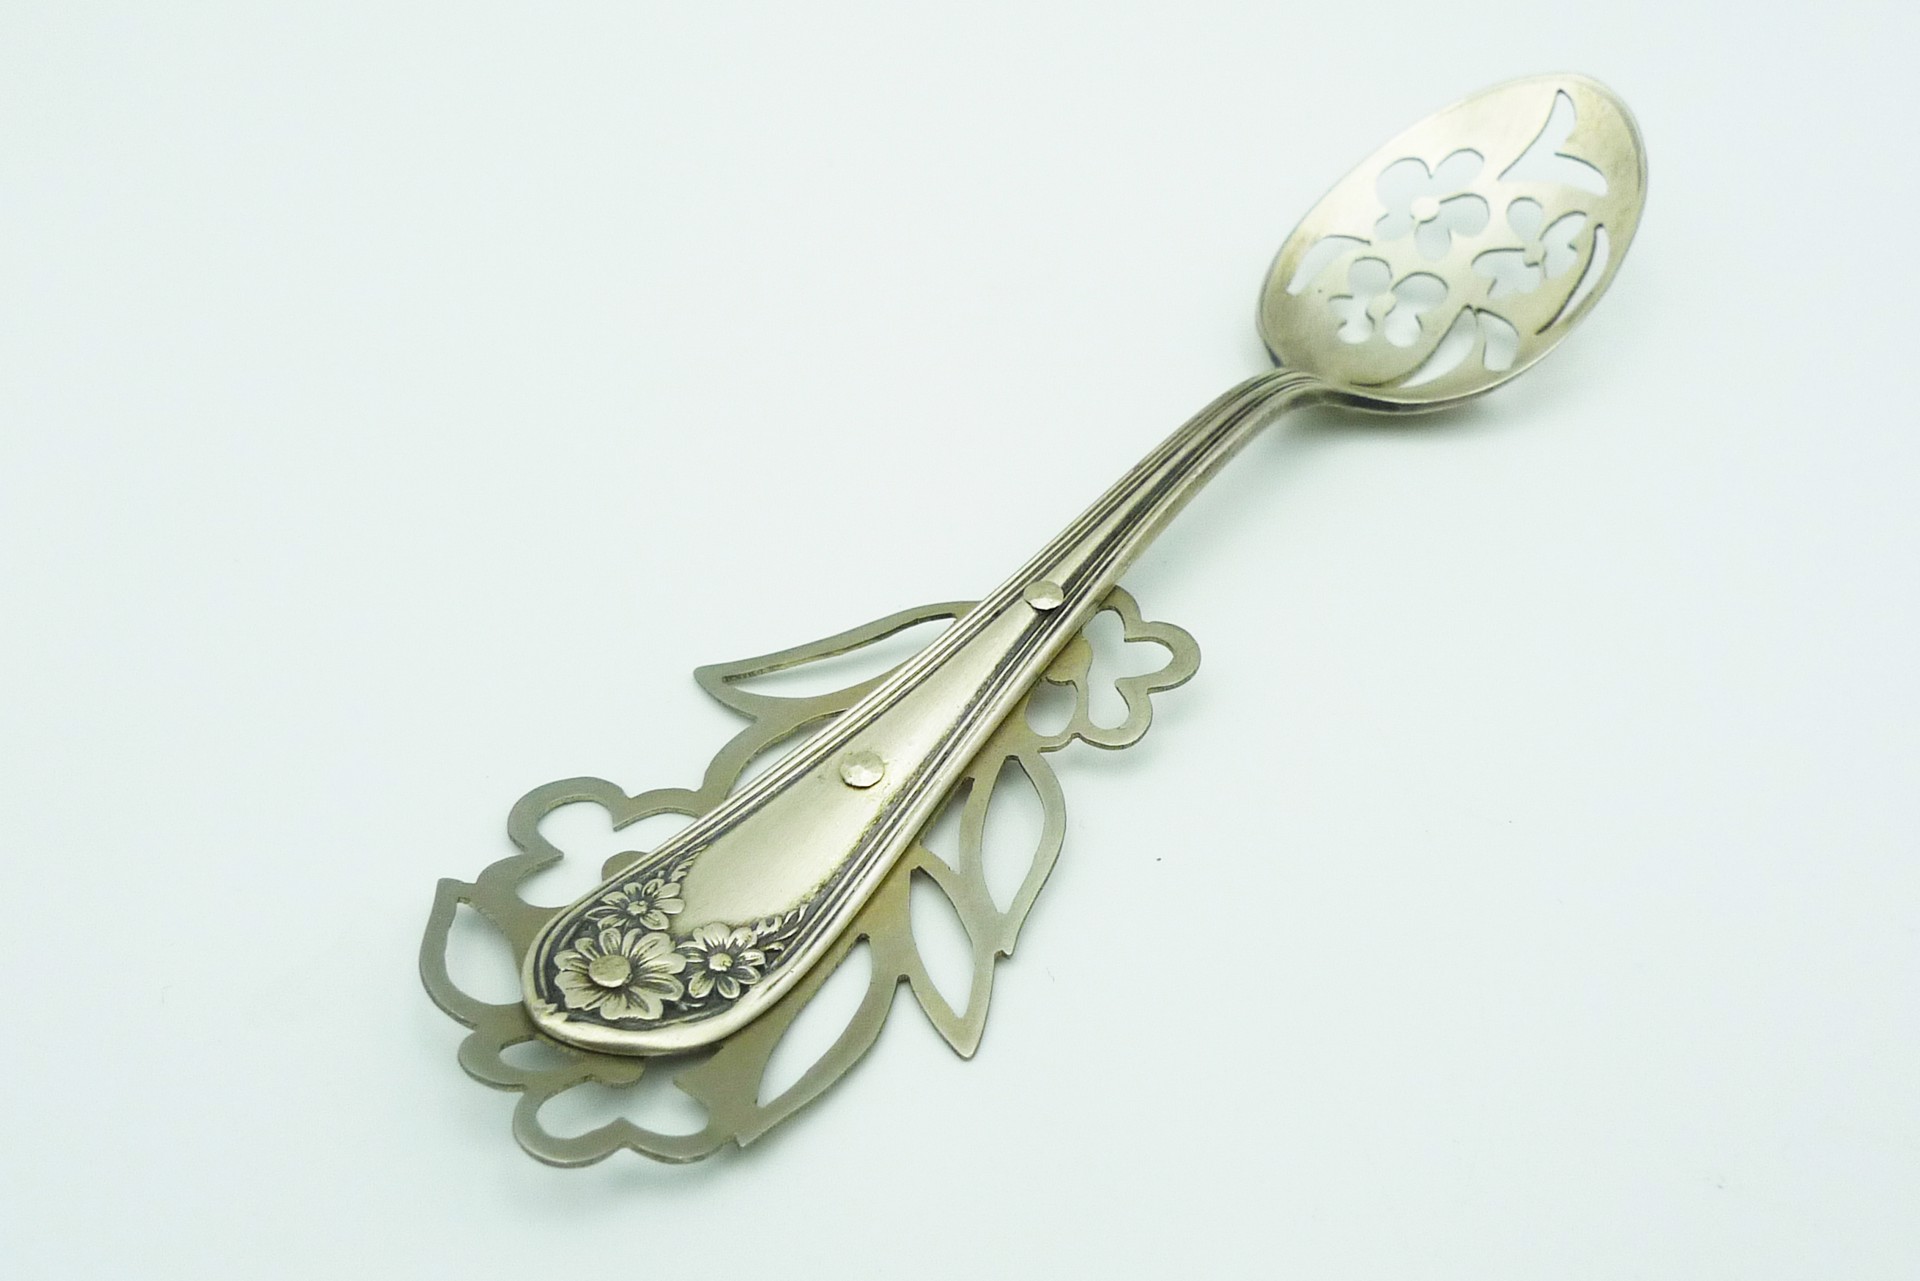 Carved Spoon by Alison L. Bailey